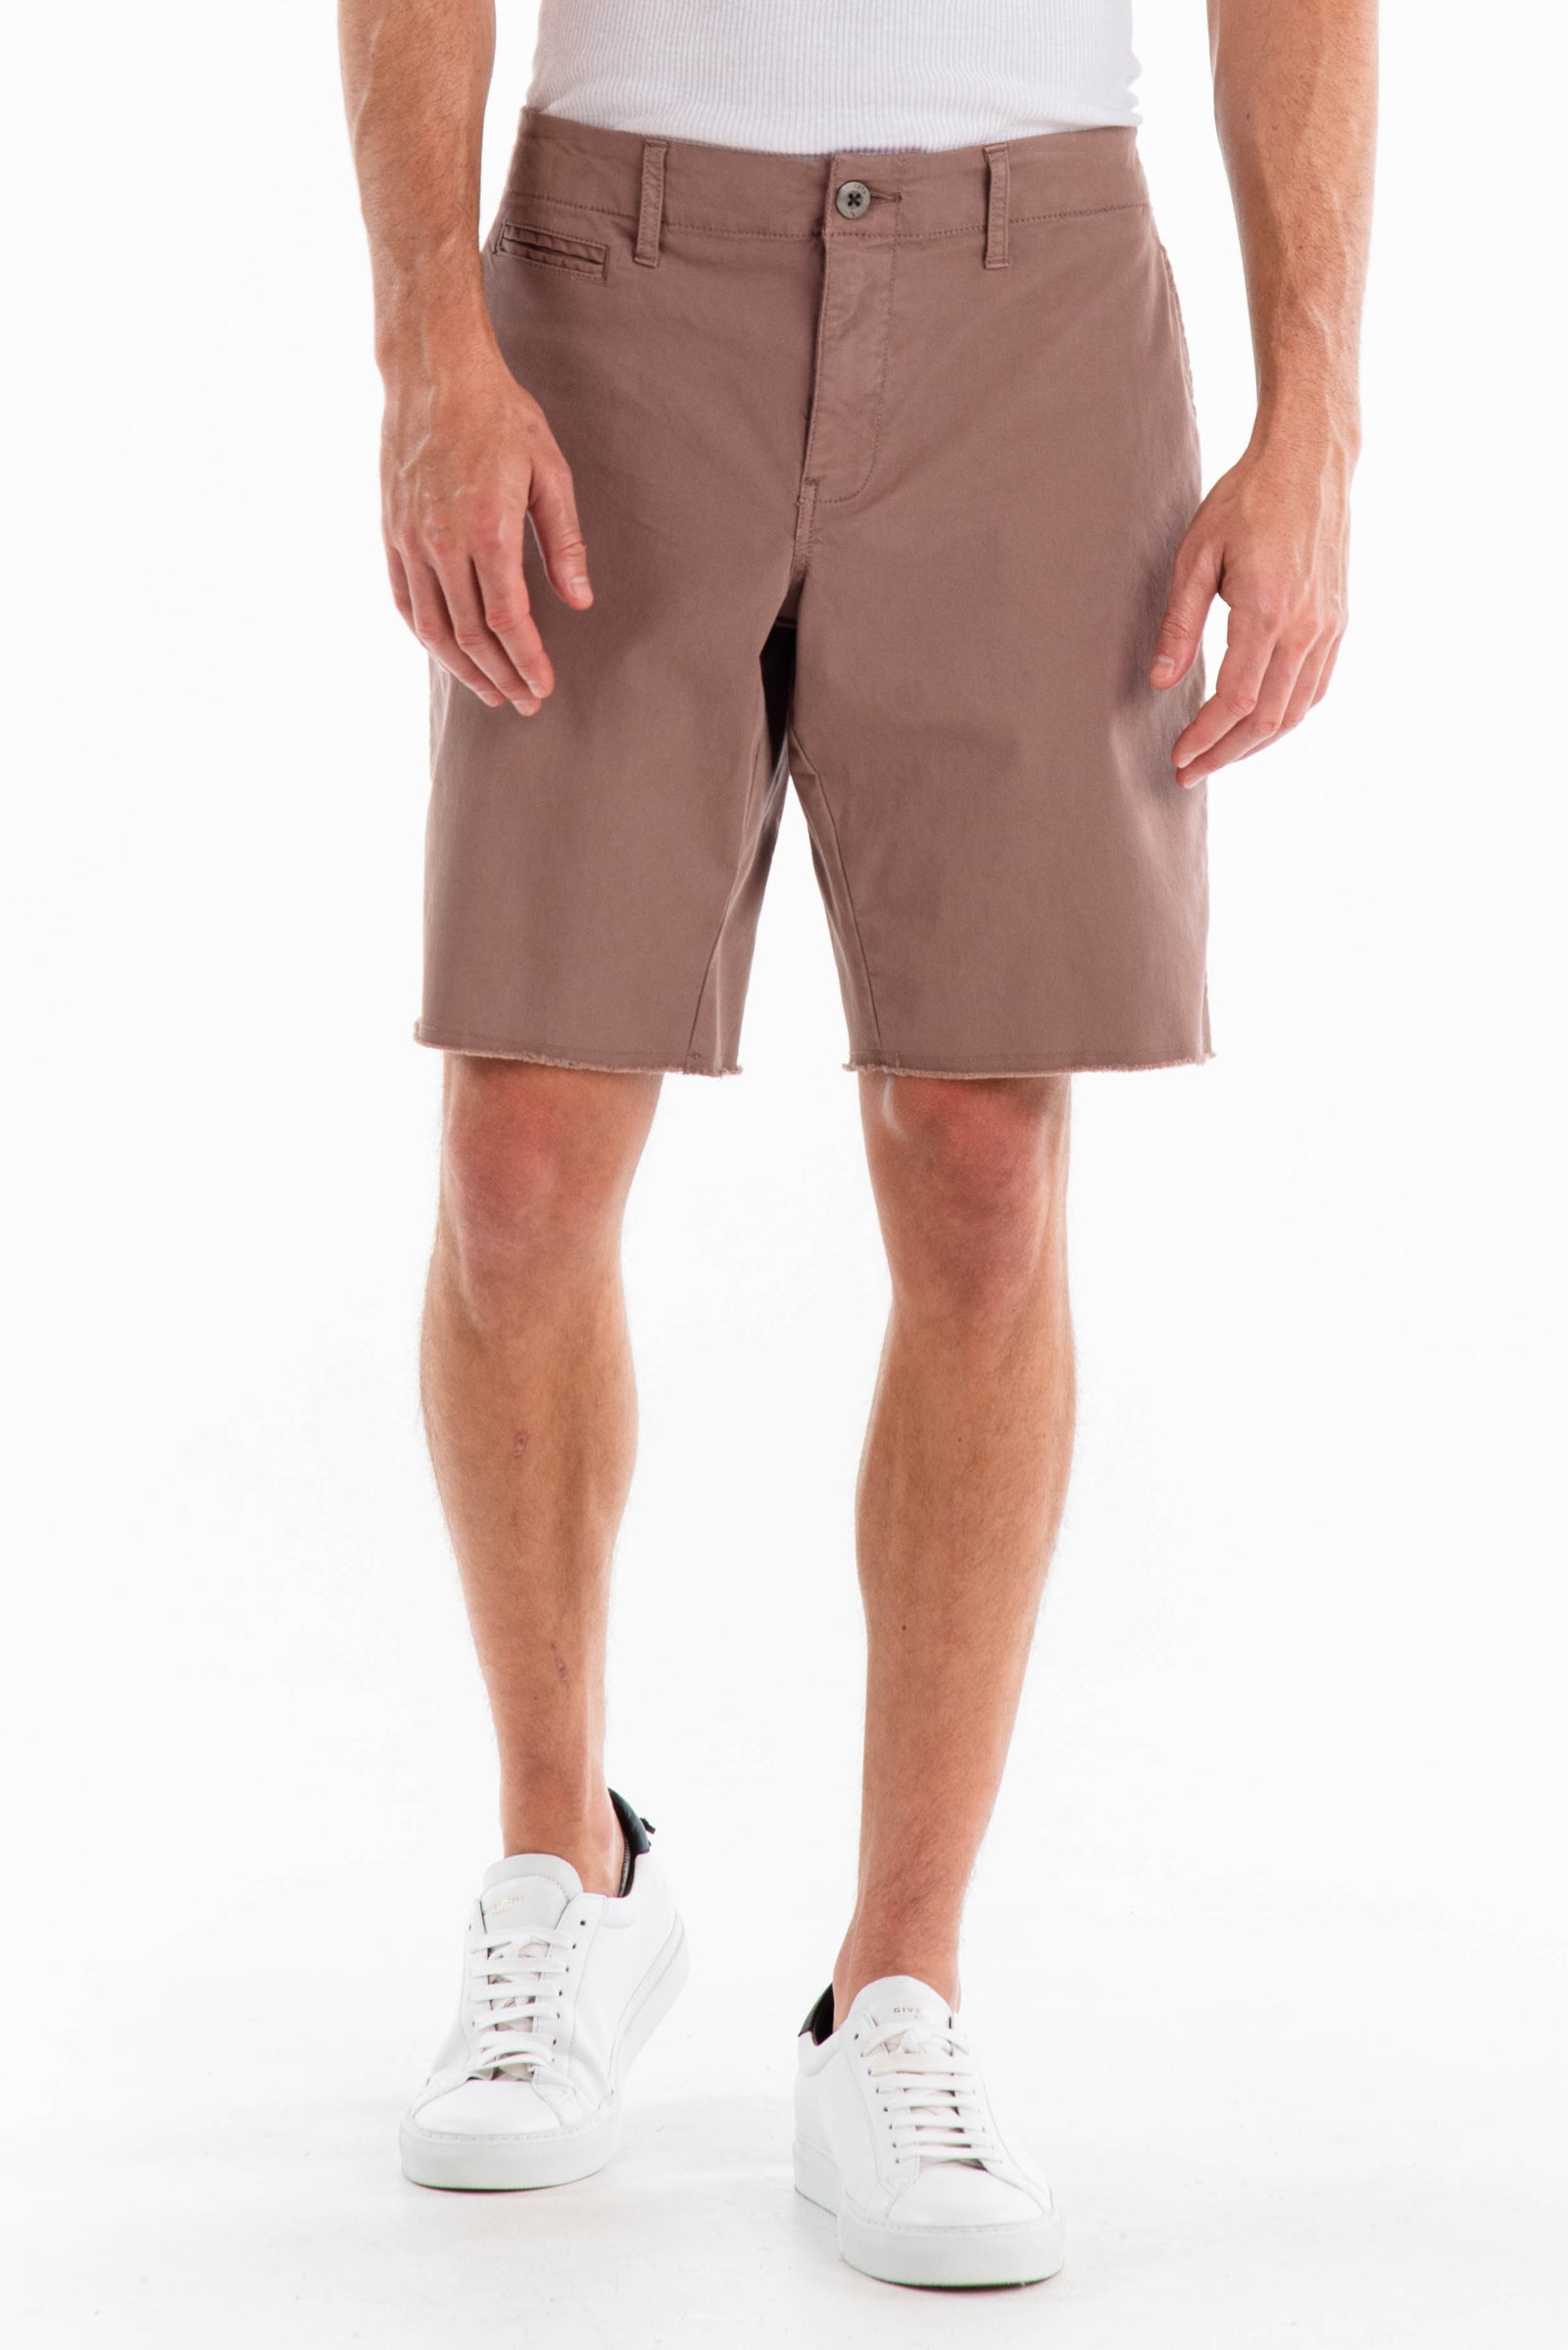 Original Paperbacks Rockland Chino Short in Chocolate on Model Cropped Front View